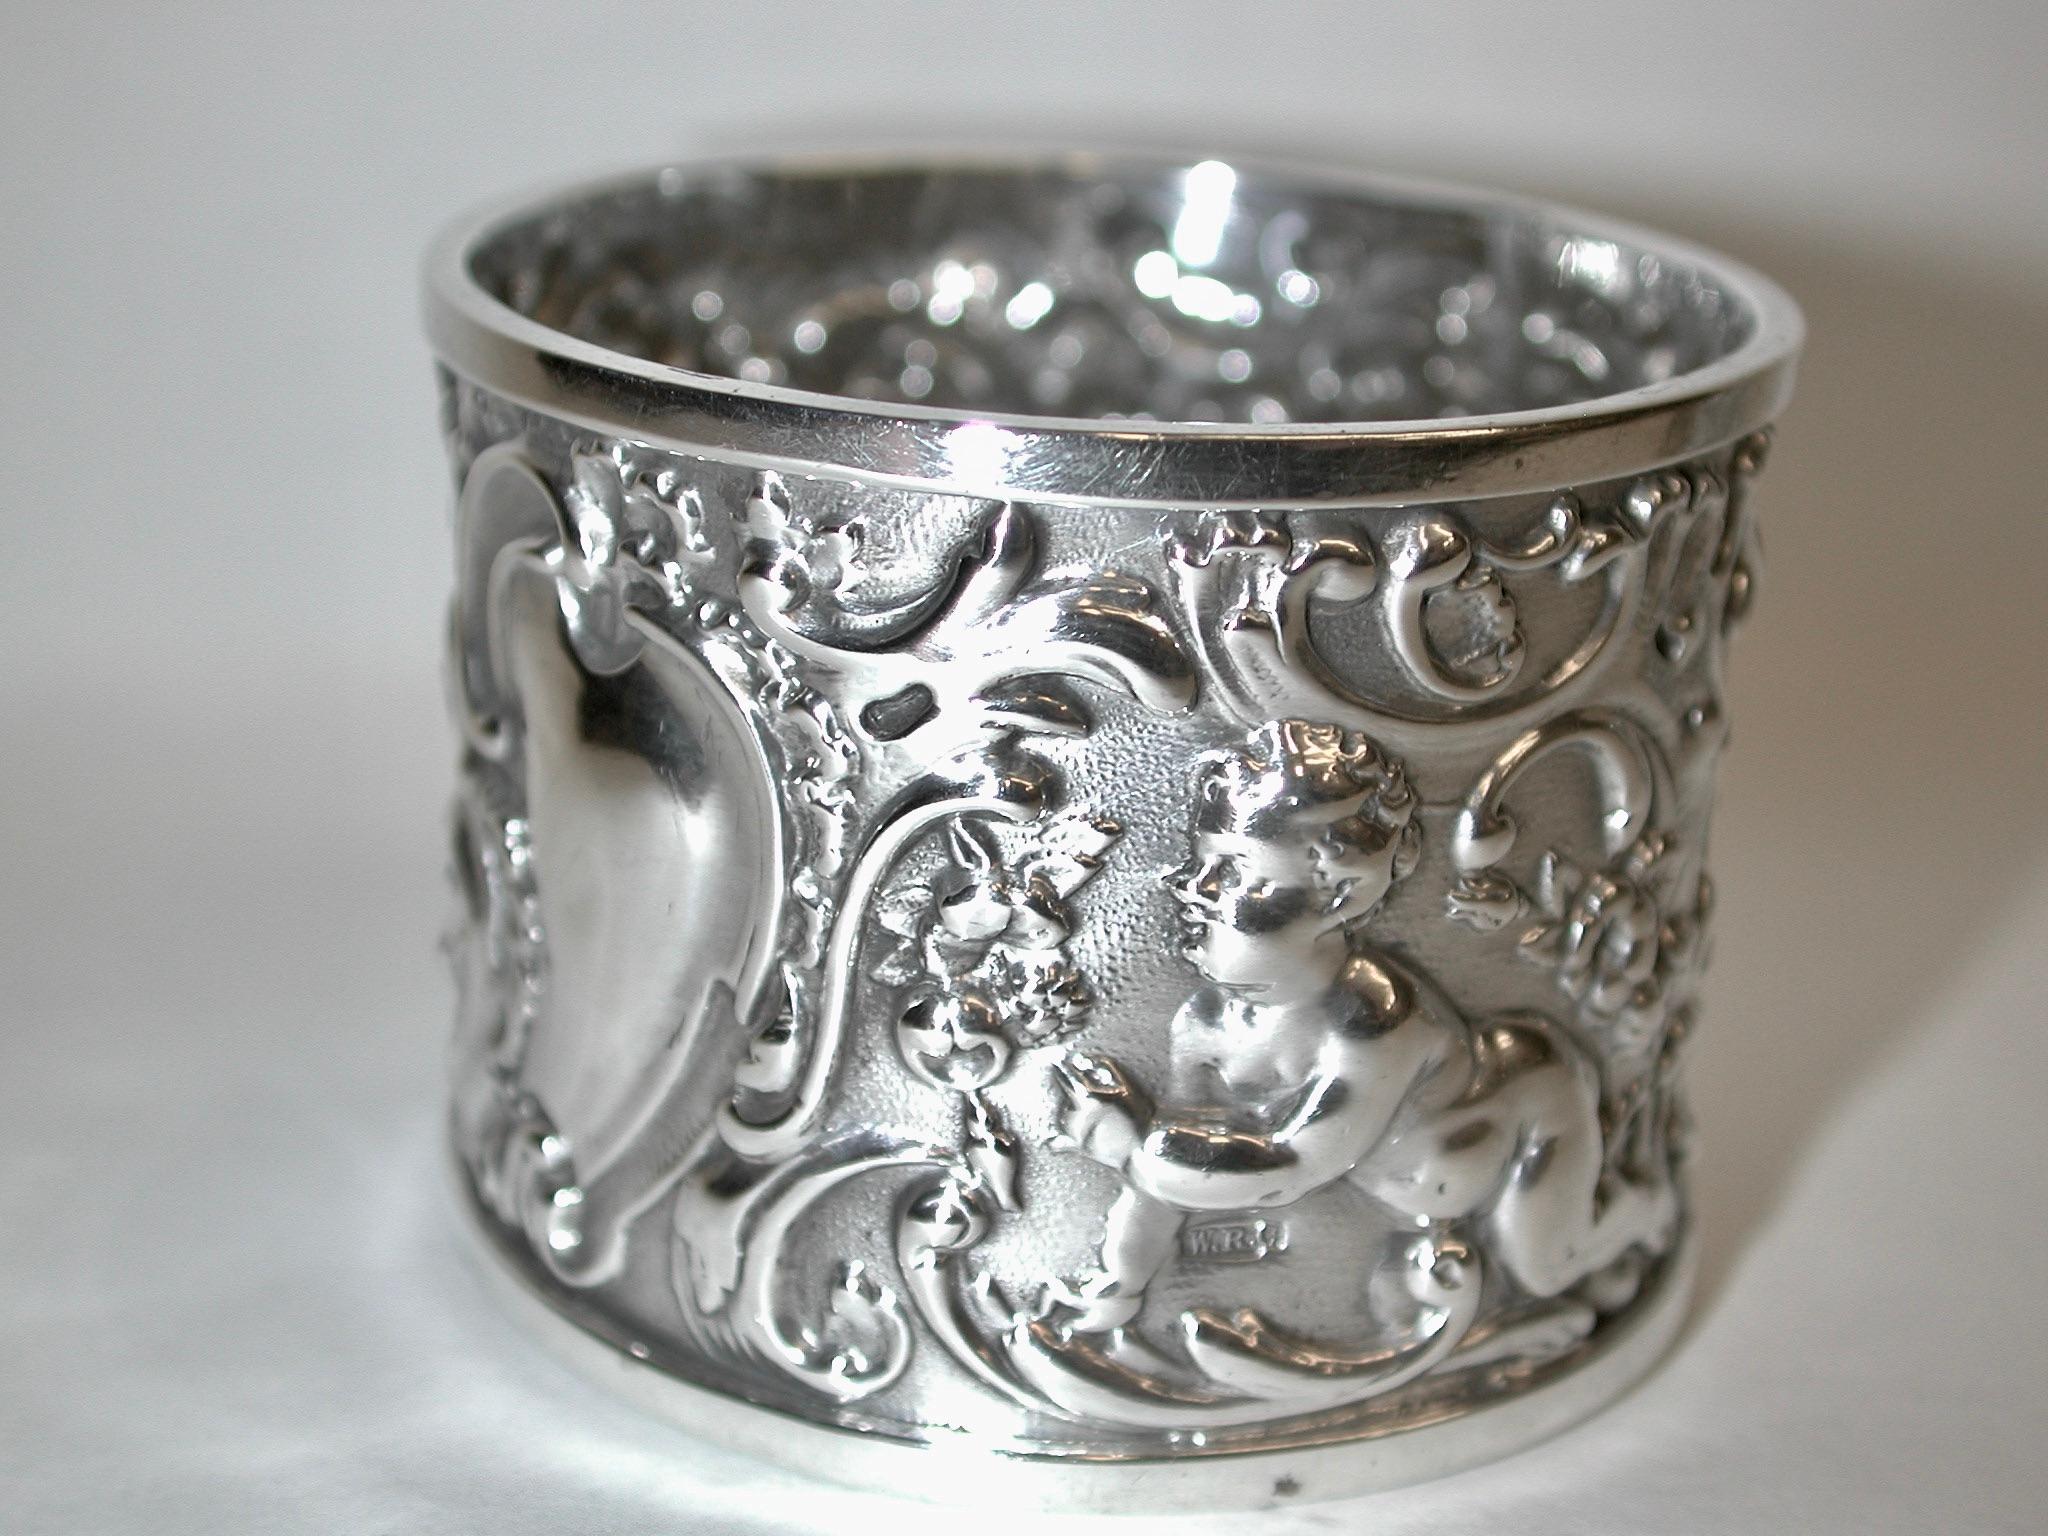 Late 19th Century Pair of Victorian Embossed Silver Napkin Rings, dated 1895, William Richard Corke